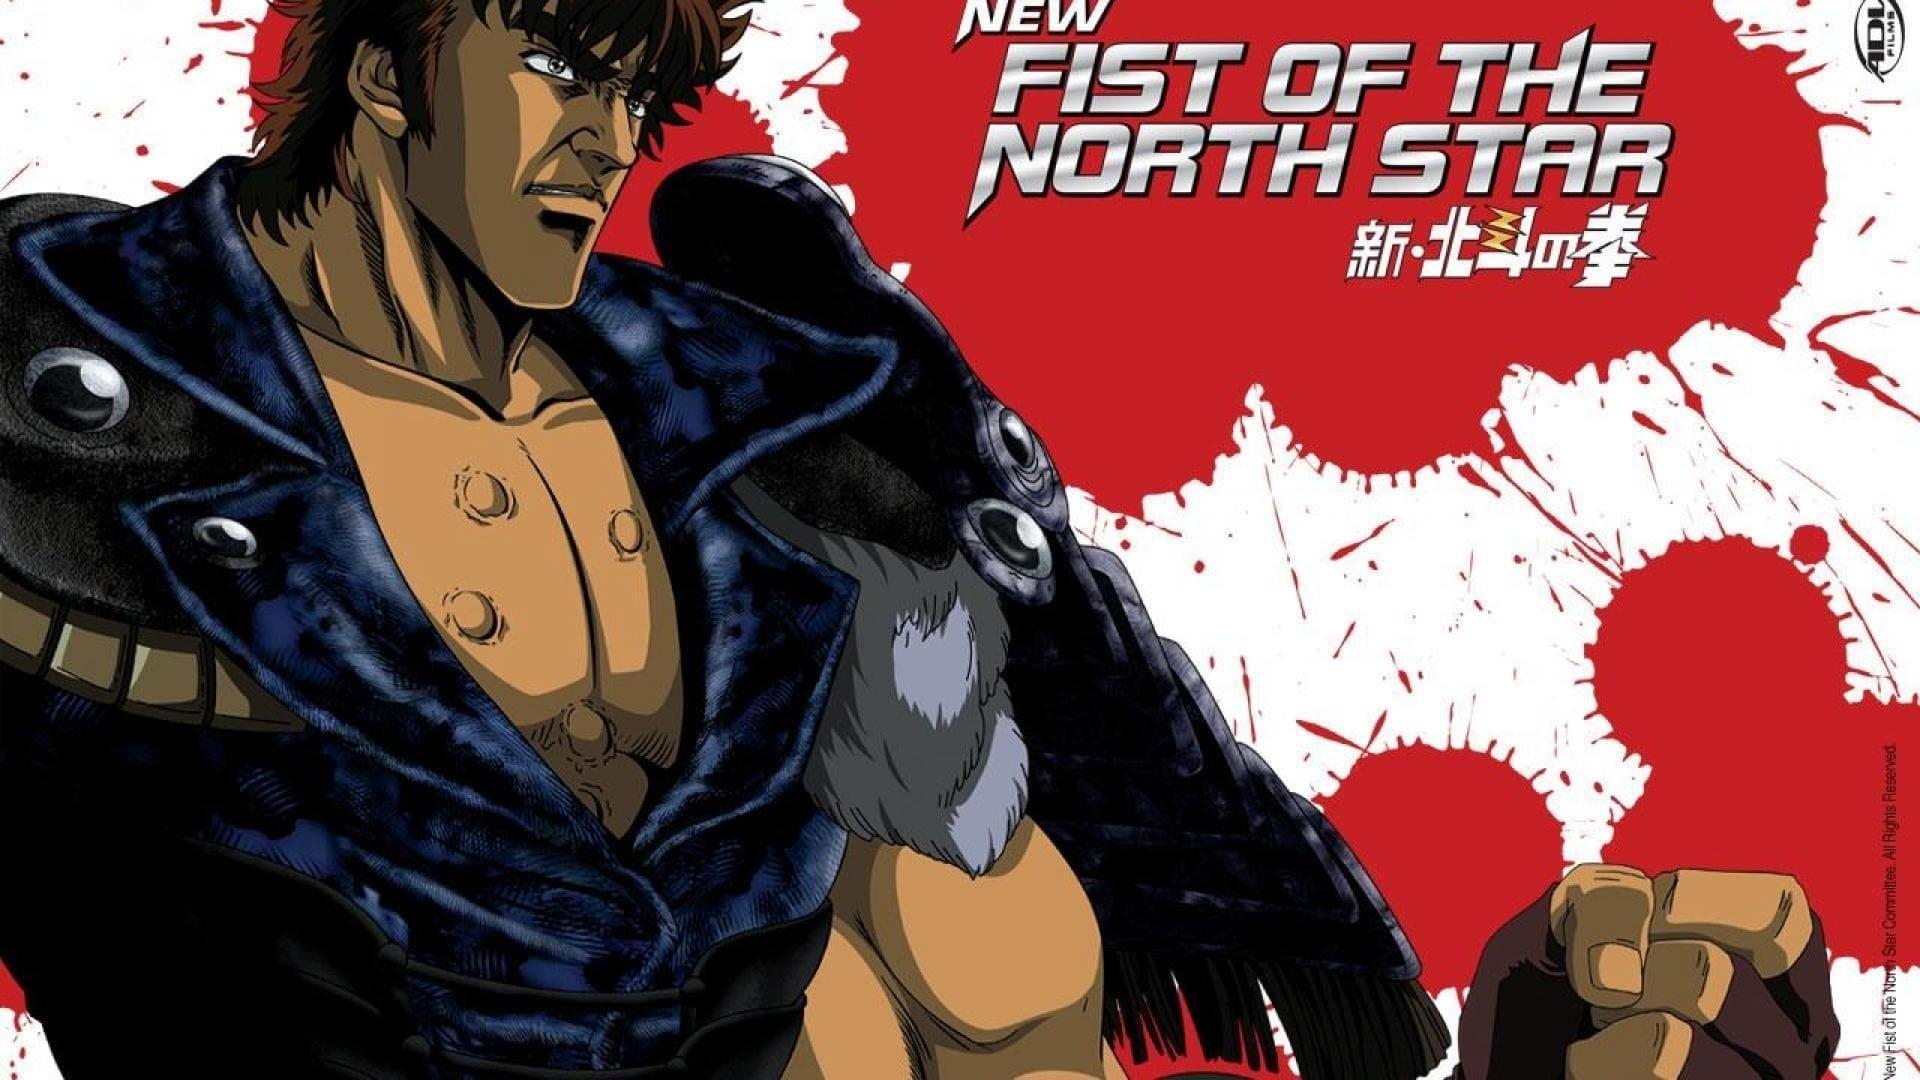 New Fist of the North Star: The Forbidden Fist backdrop